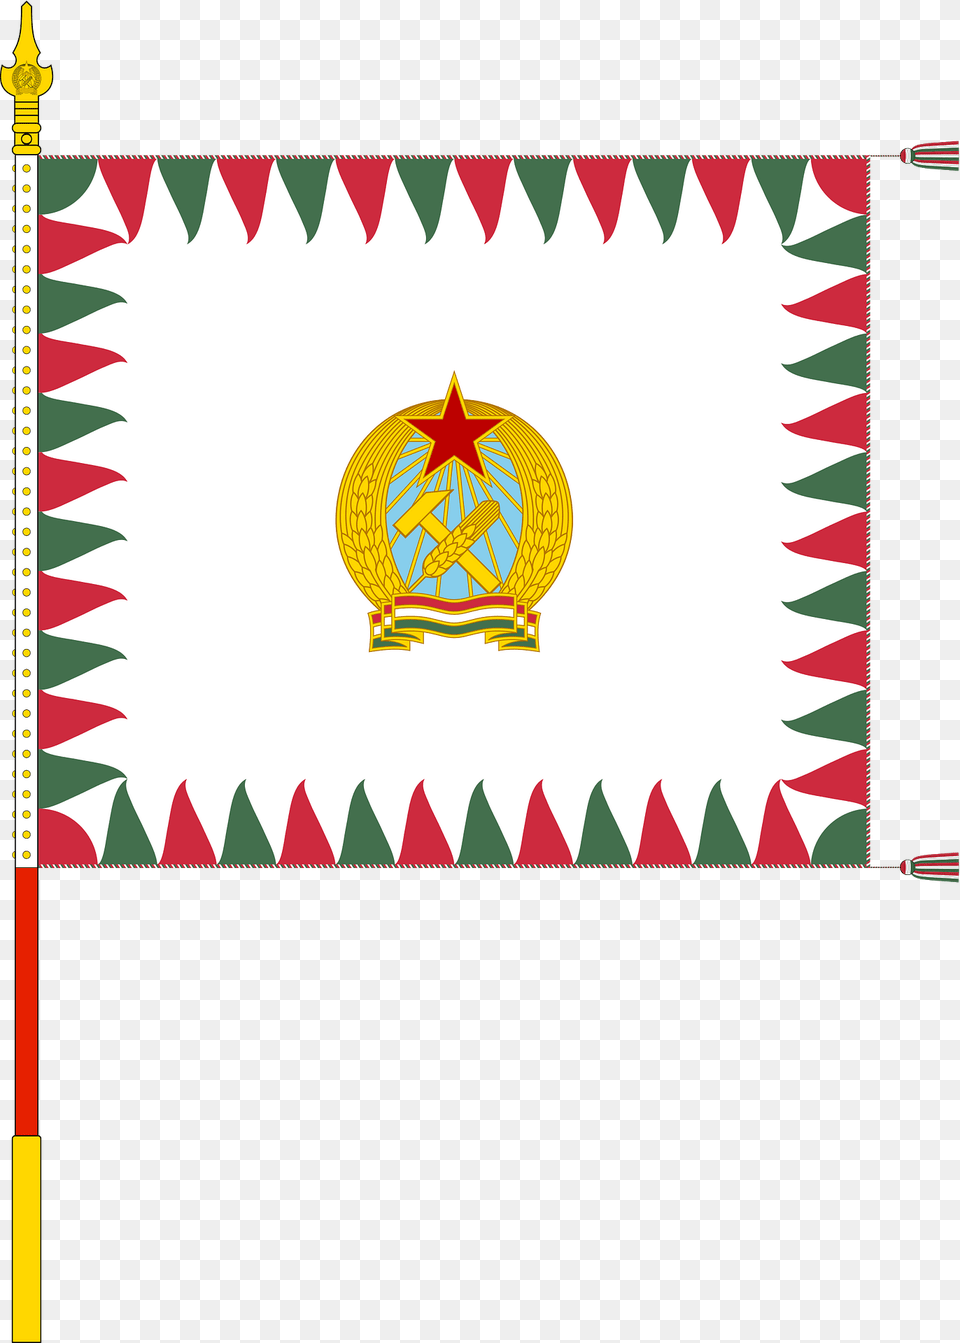 Standard For Armoured Regiments Of The Hungarian Defence Forces 1949 1950 With Staff Clipart Free Transparent Png